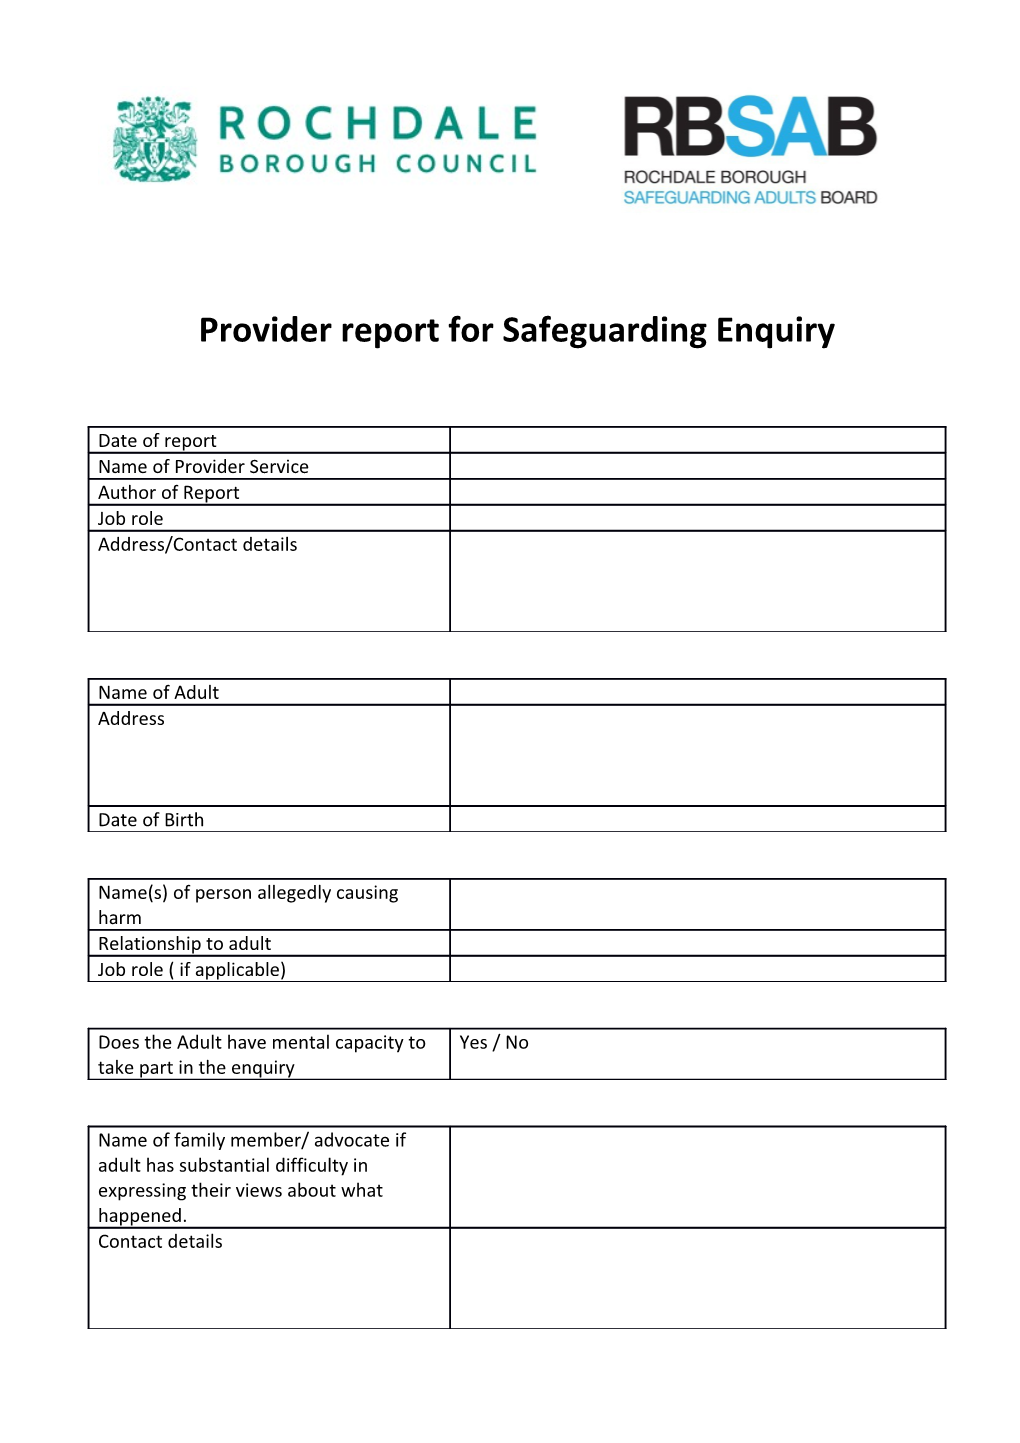 Provider Report for Safeguarding Enquiry